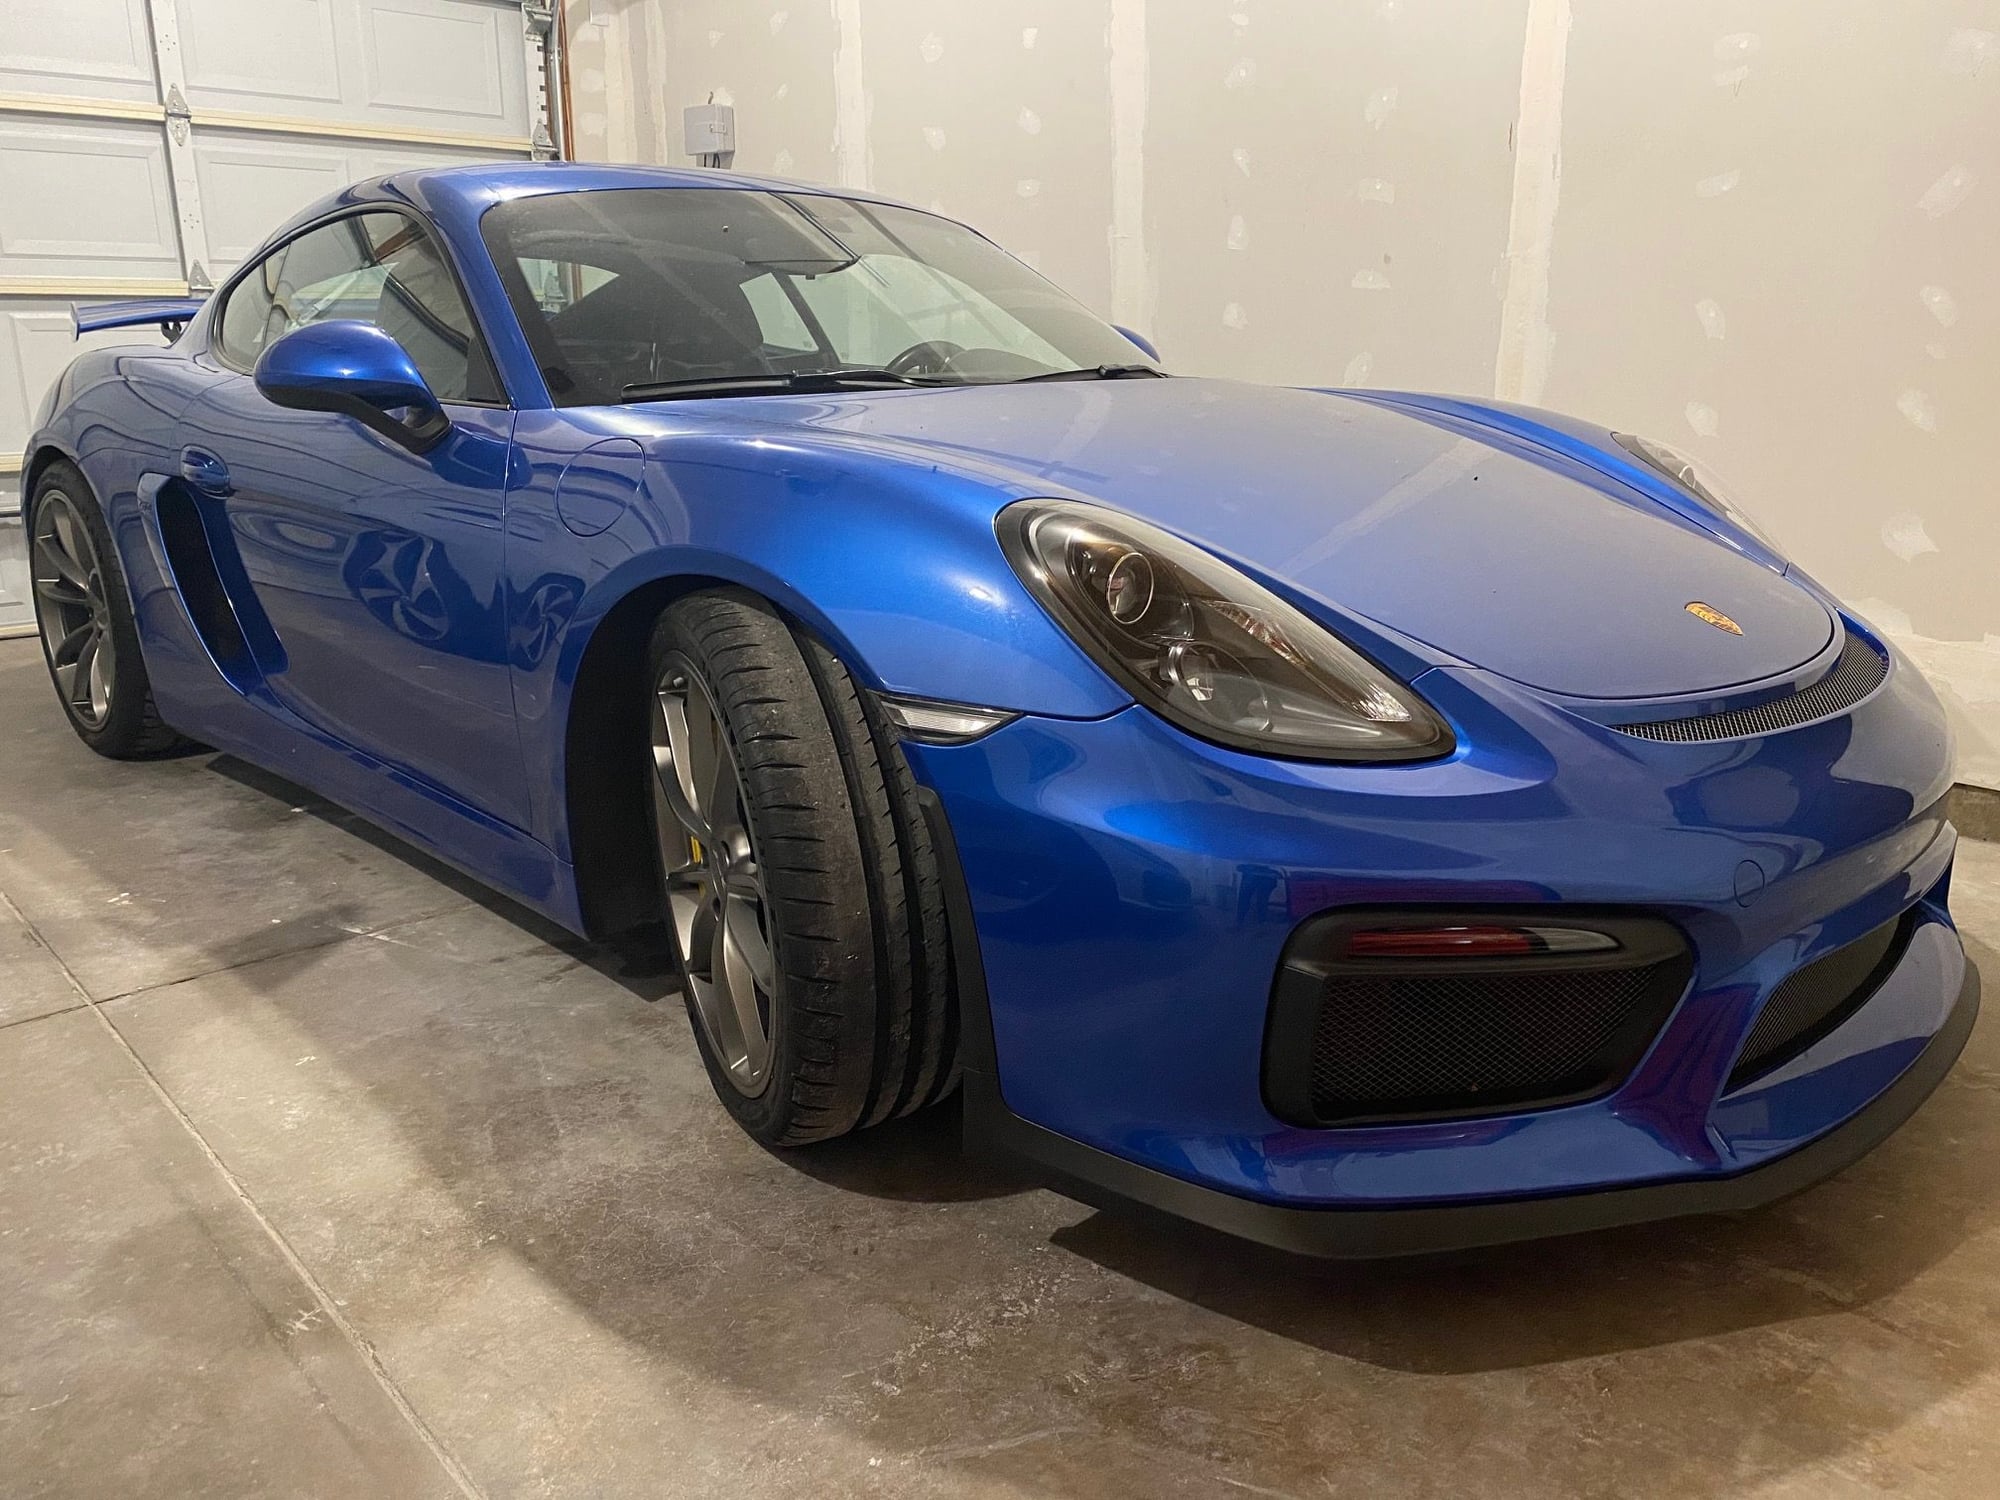 2016 Porsche Cayman GT4 - CPO 2016 Cayman GT4: Sapphire, PCCB, LWB - Used - VIN WP0AC2A87GK191409 - 9,655 Miles - 6 cyl - 2WD - Manual - Coupe - Blue - Denver, CO 80247, United States